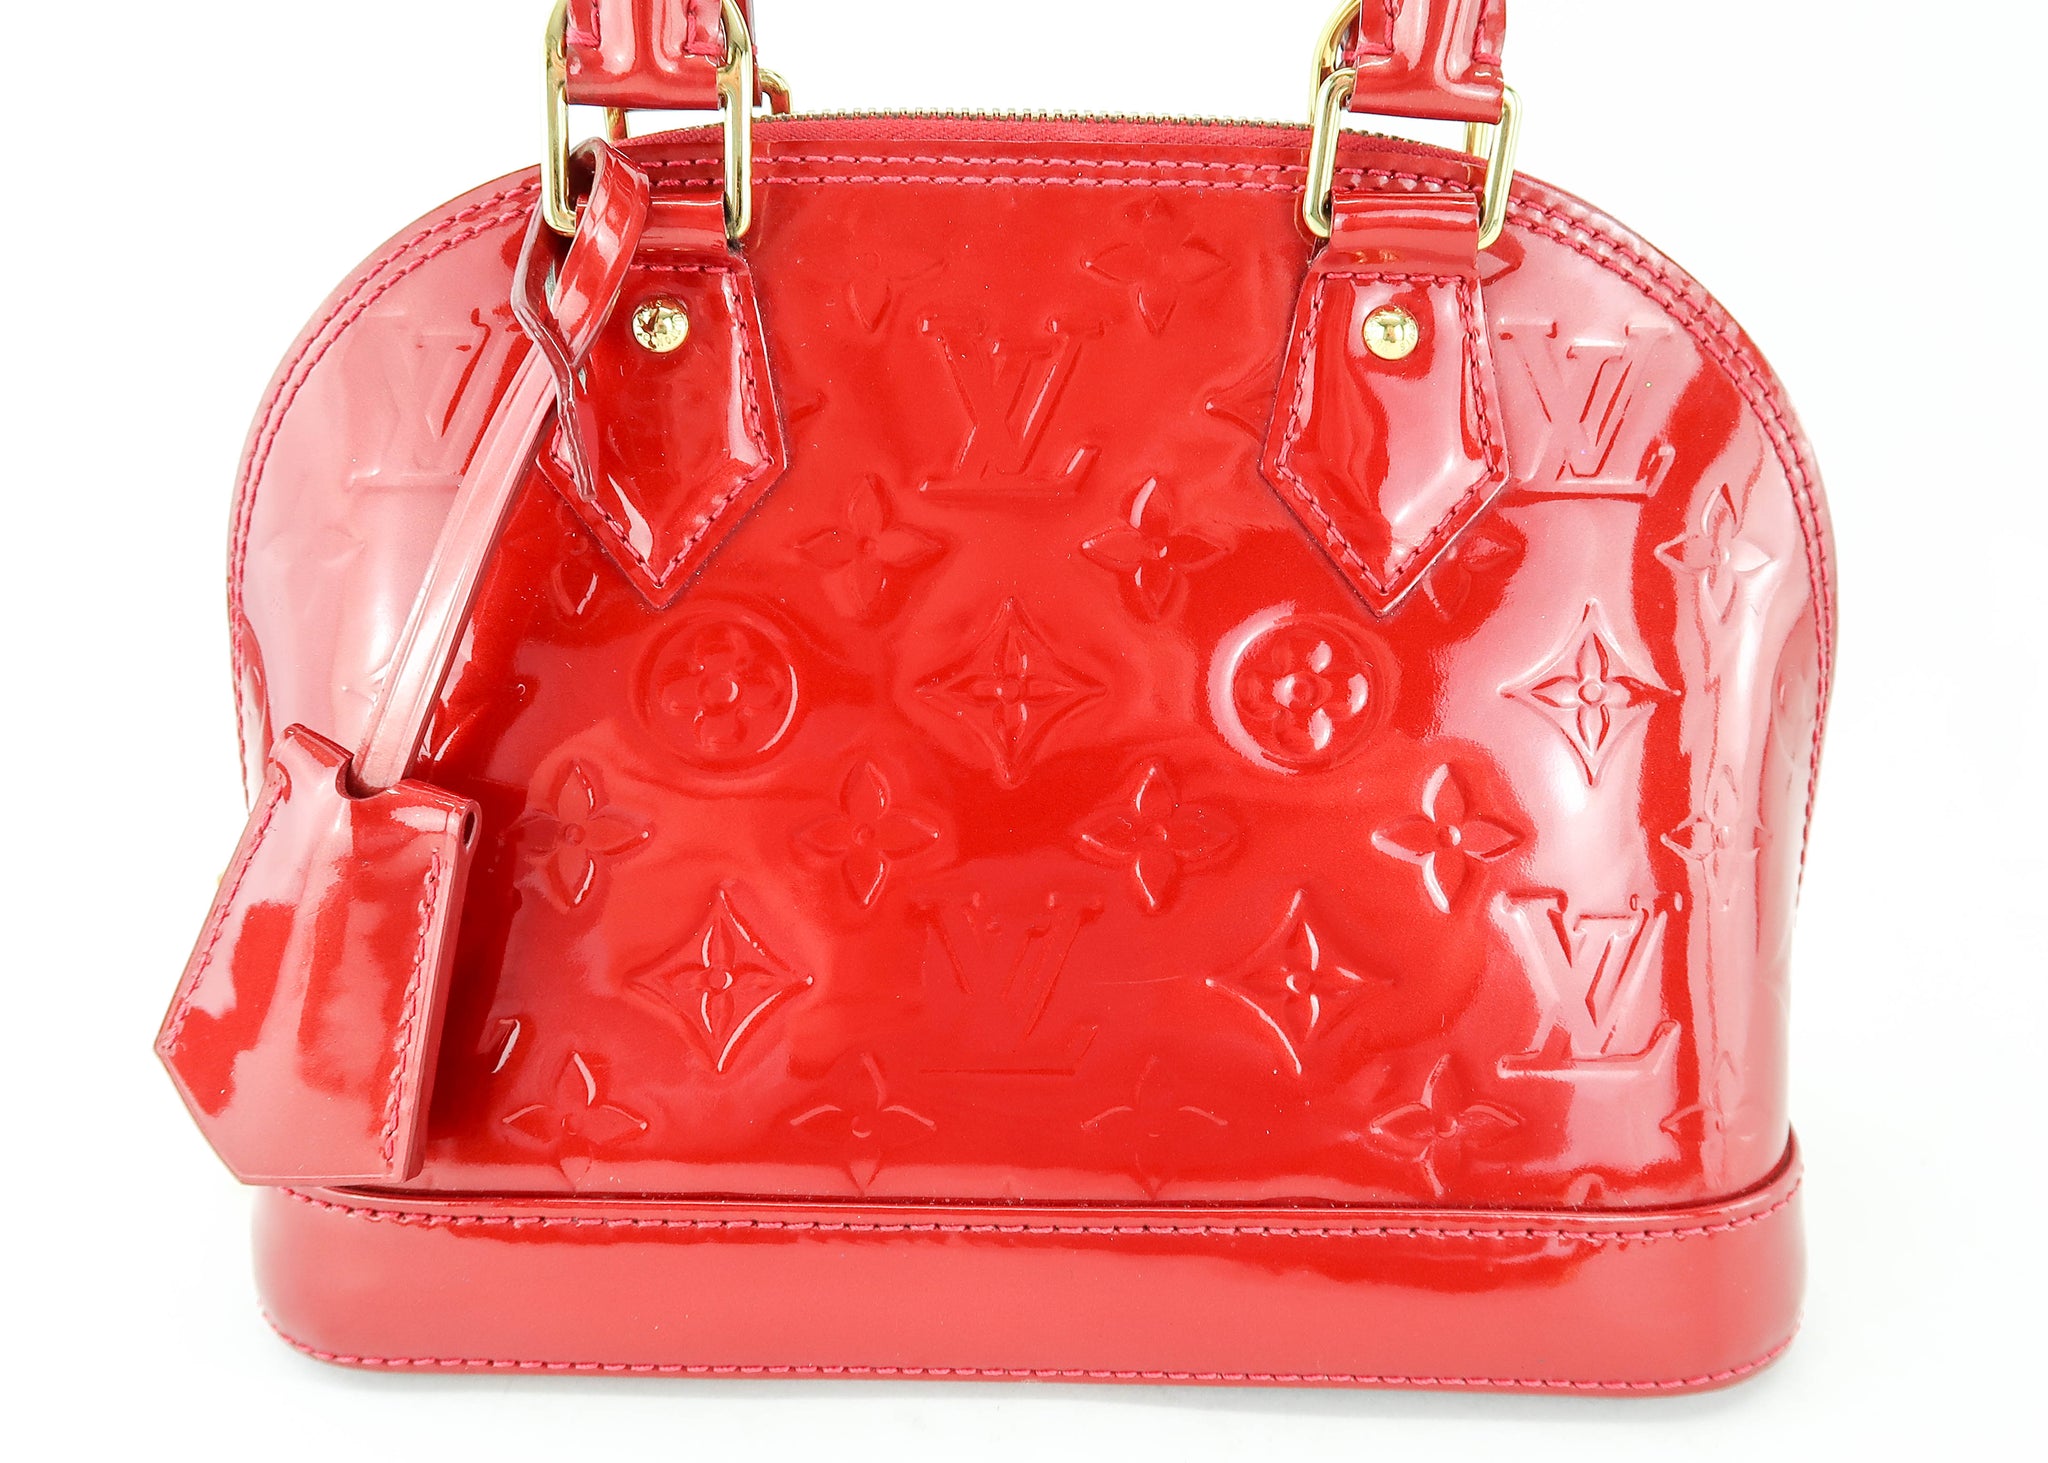 Louis Vuitton - Authenticated Alma Handbag - Patent Leather Red Plain for Women, Very Good Condition